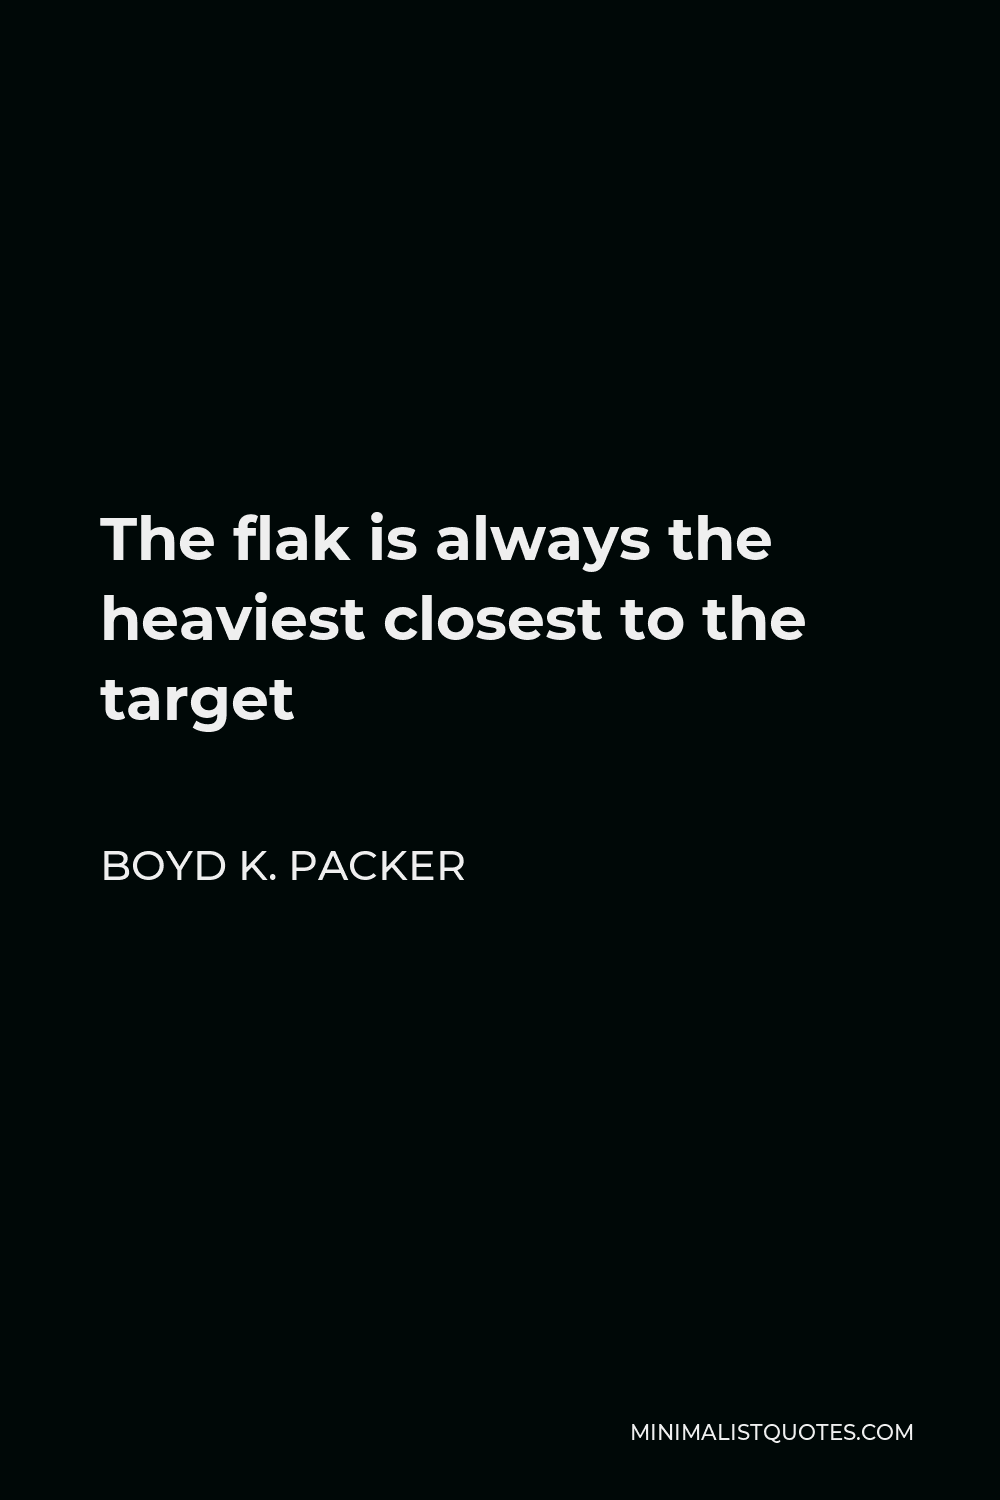 Boyd K. Packer Quote - The flak is always the heaviest closest to the target